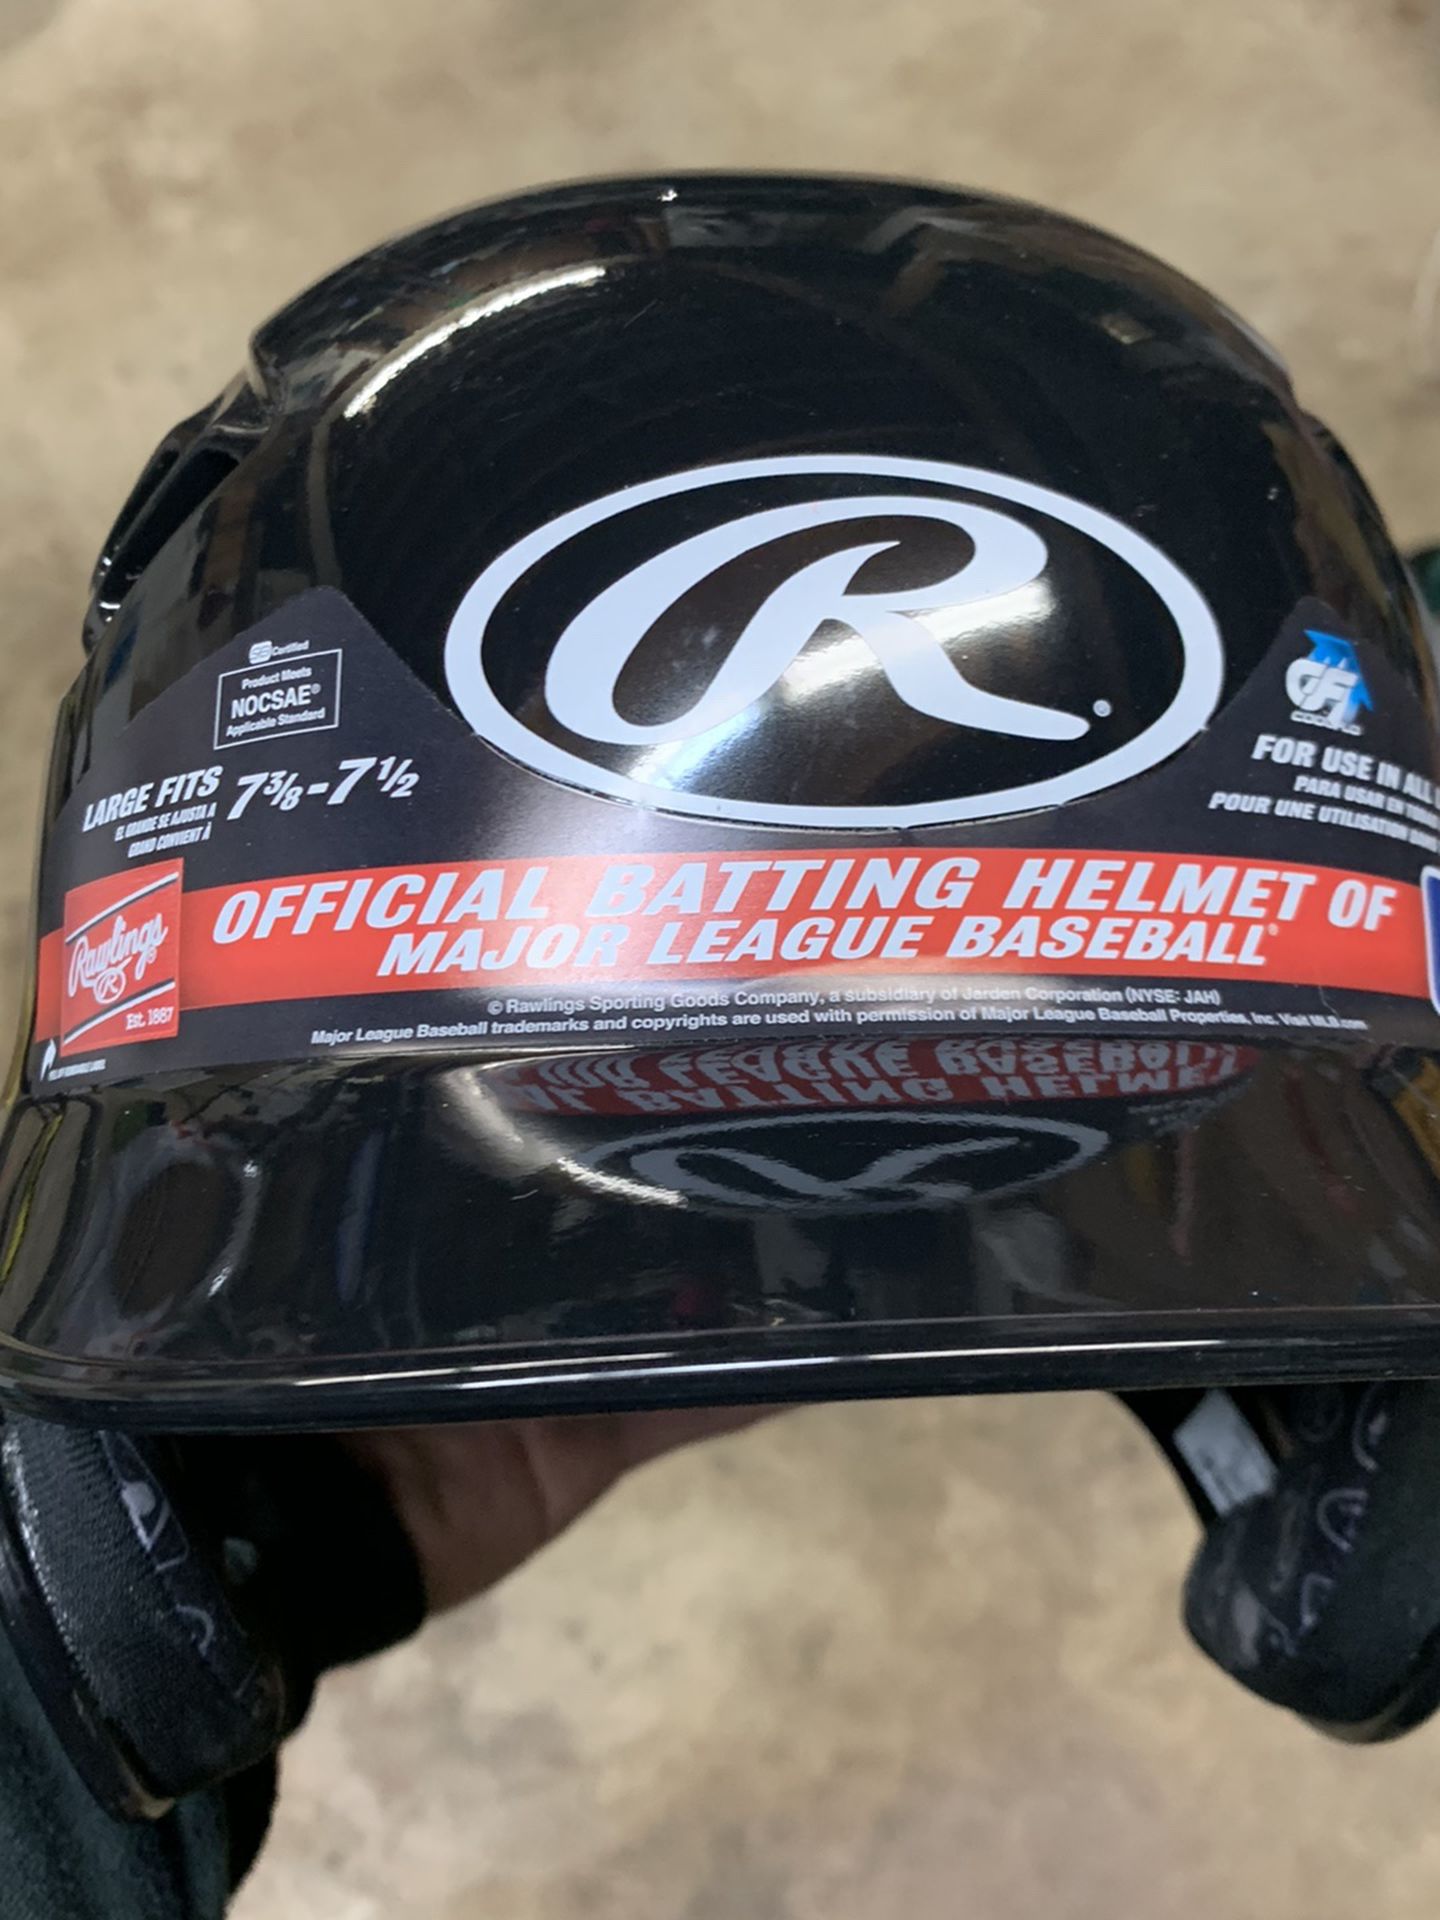 Baseball Batting Helmet - Rawlings Official Batting Helmet Of The MLB - 7 3/8 - 7 1/2 - NOCSAE APPLICABLE - For Use In All Leagues - NEW - Price: $25